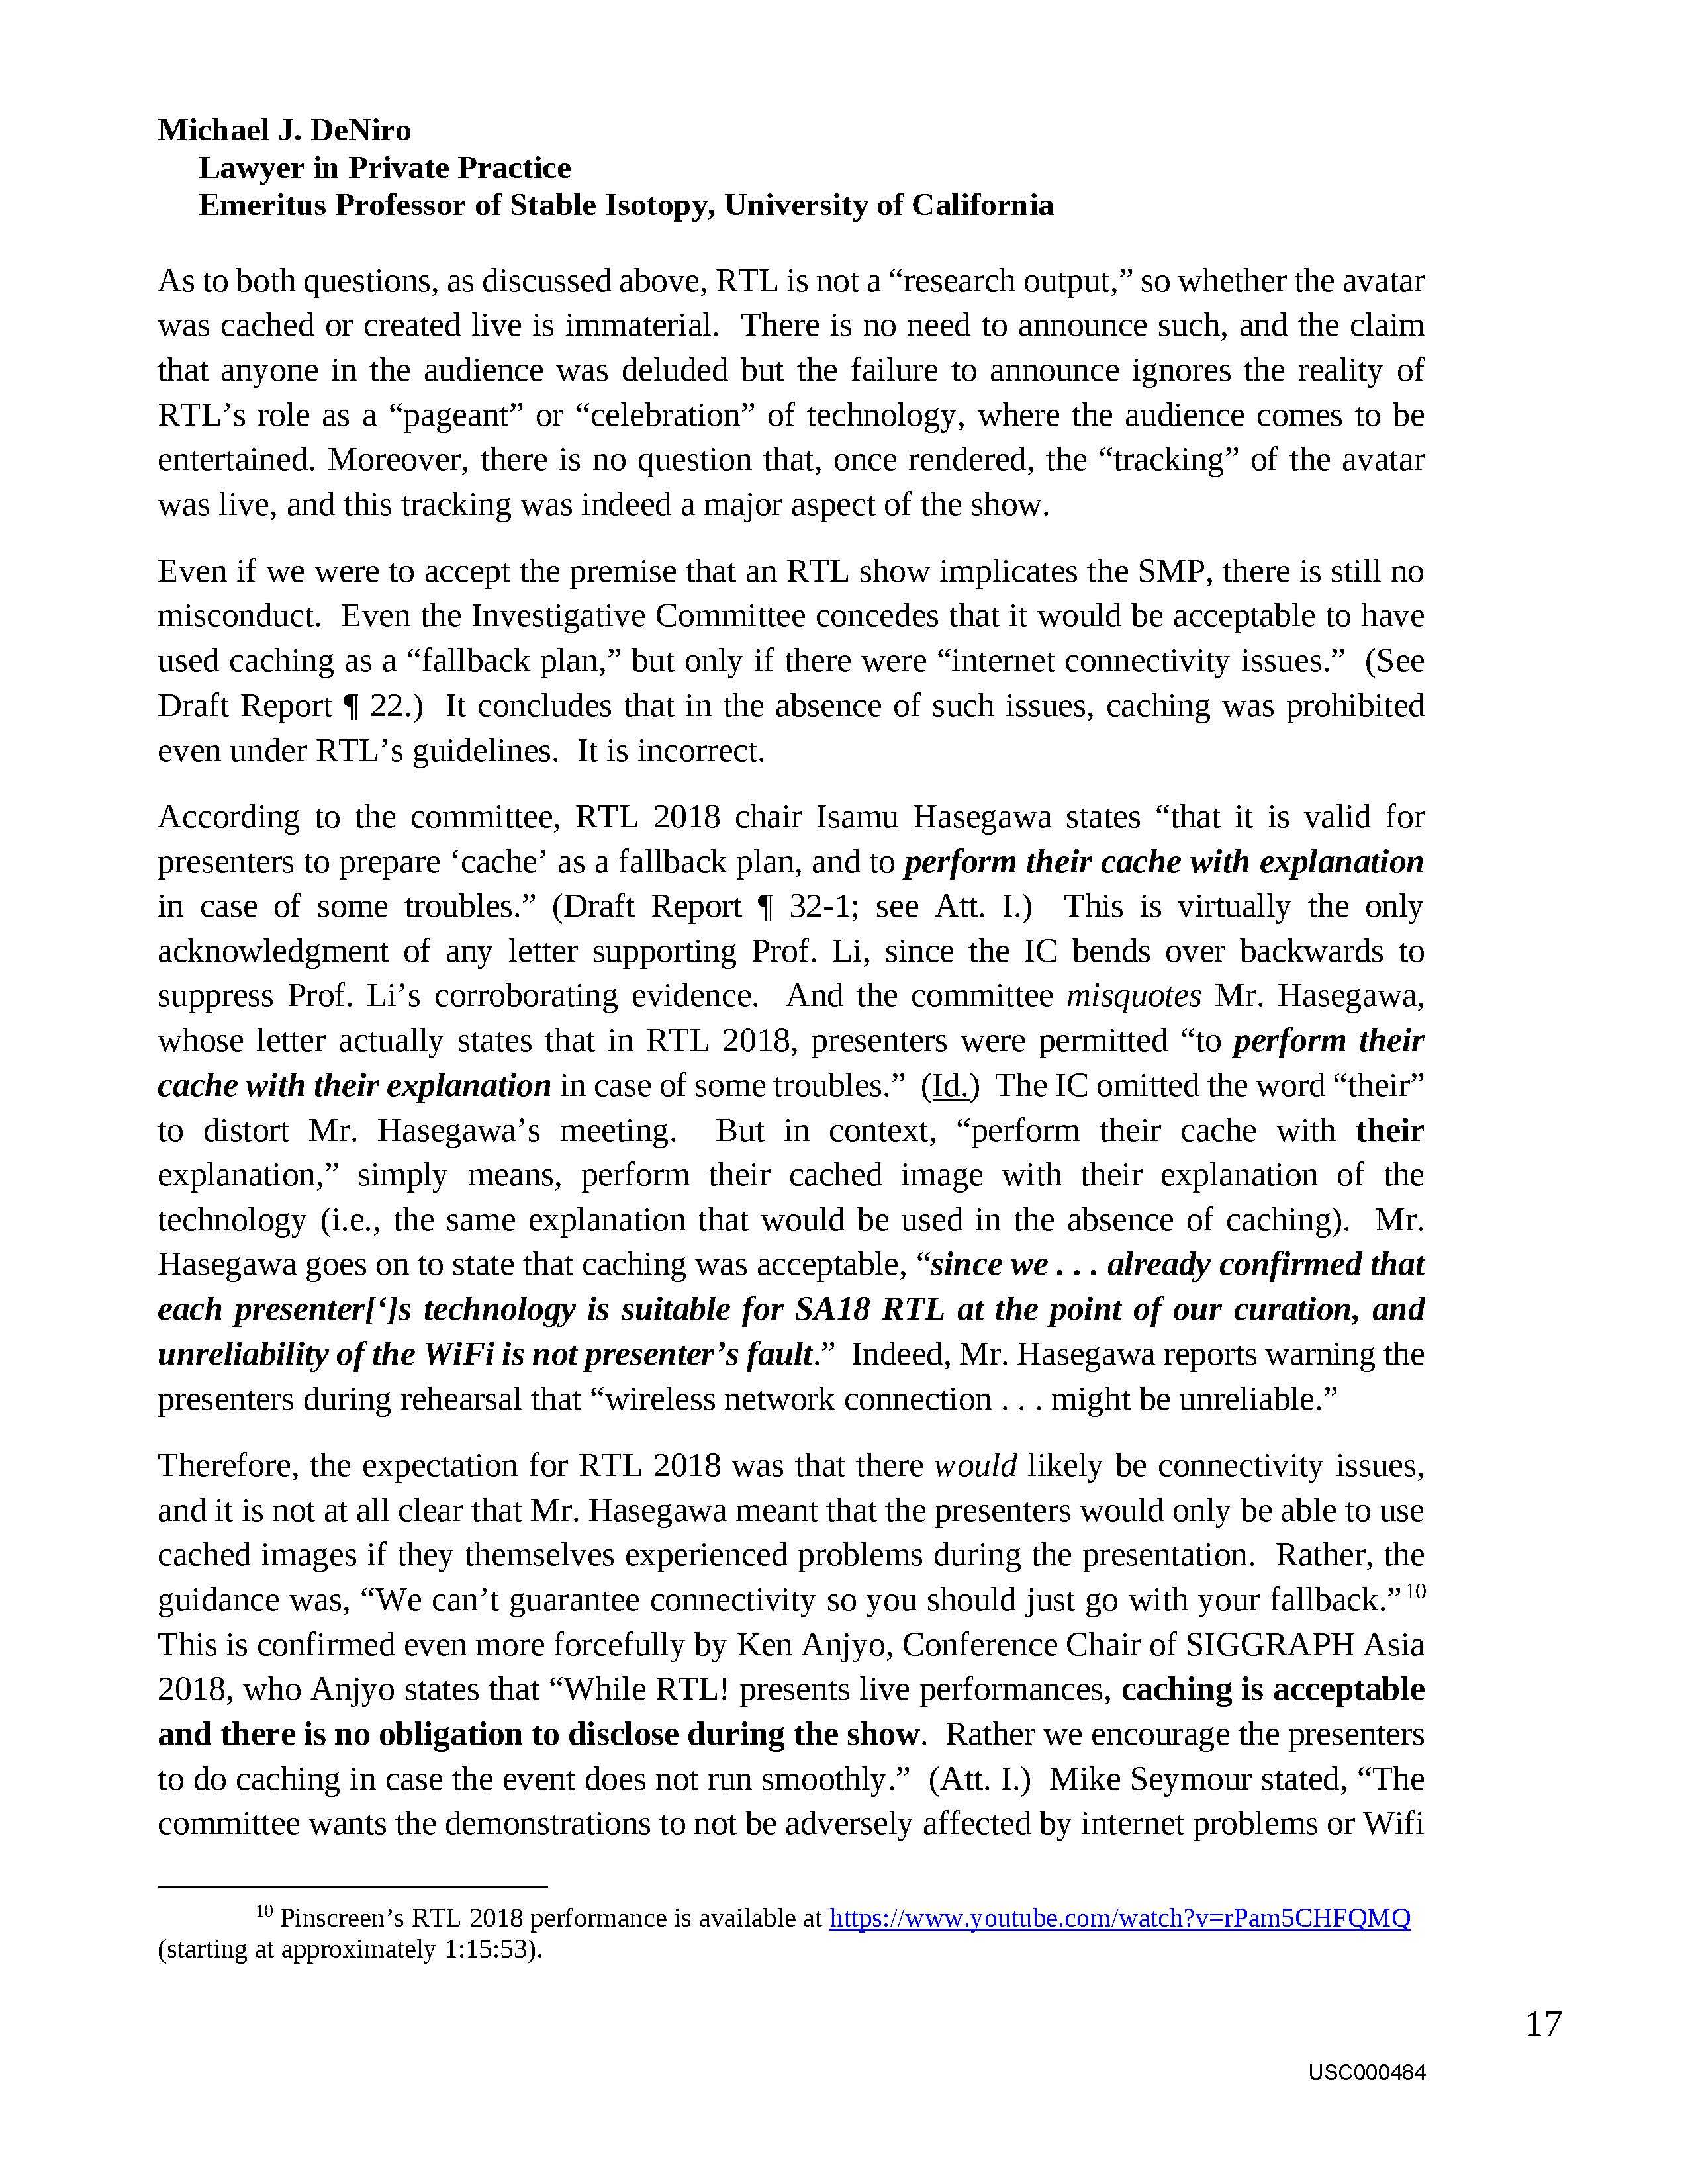 USC's Investigation Report re Hao Li's and Pinscreen's Scientific Misconduct at ACM SIGGRAPH RTL 2017 - Full Report Page 486